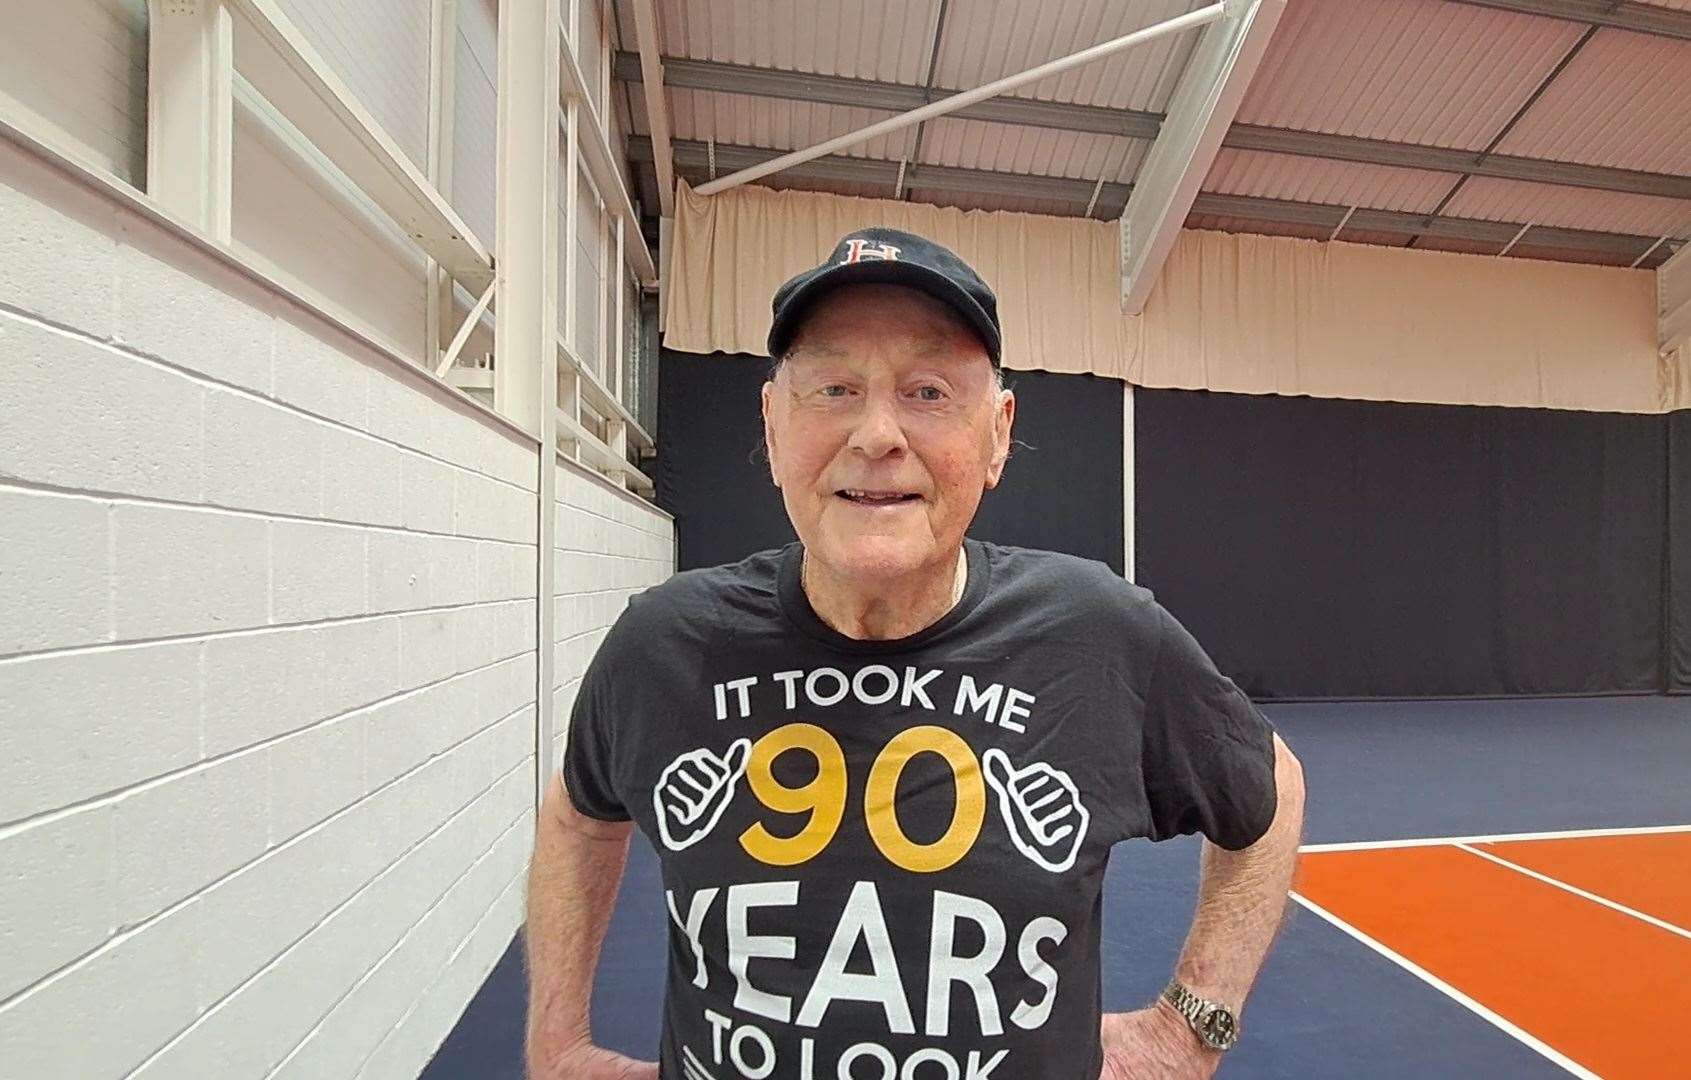 Brian Jarrett, 90, began playing tennis when he was just 10 years old